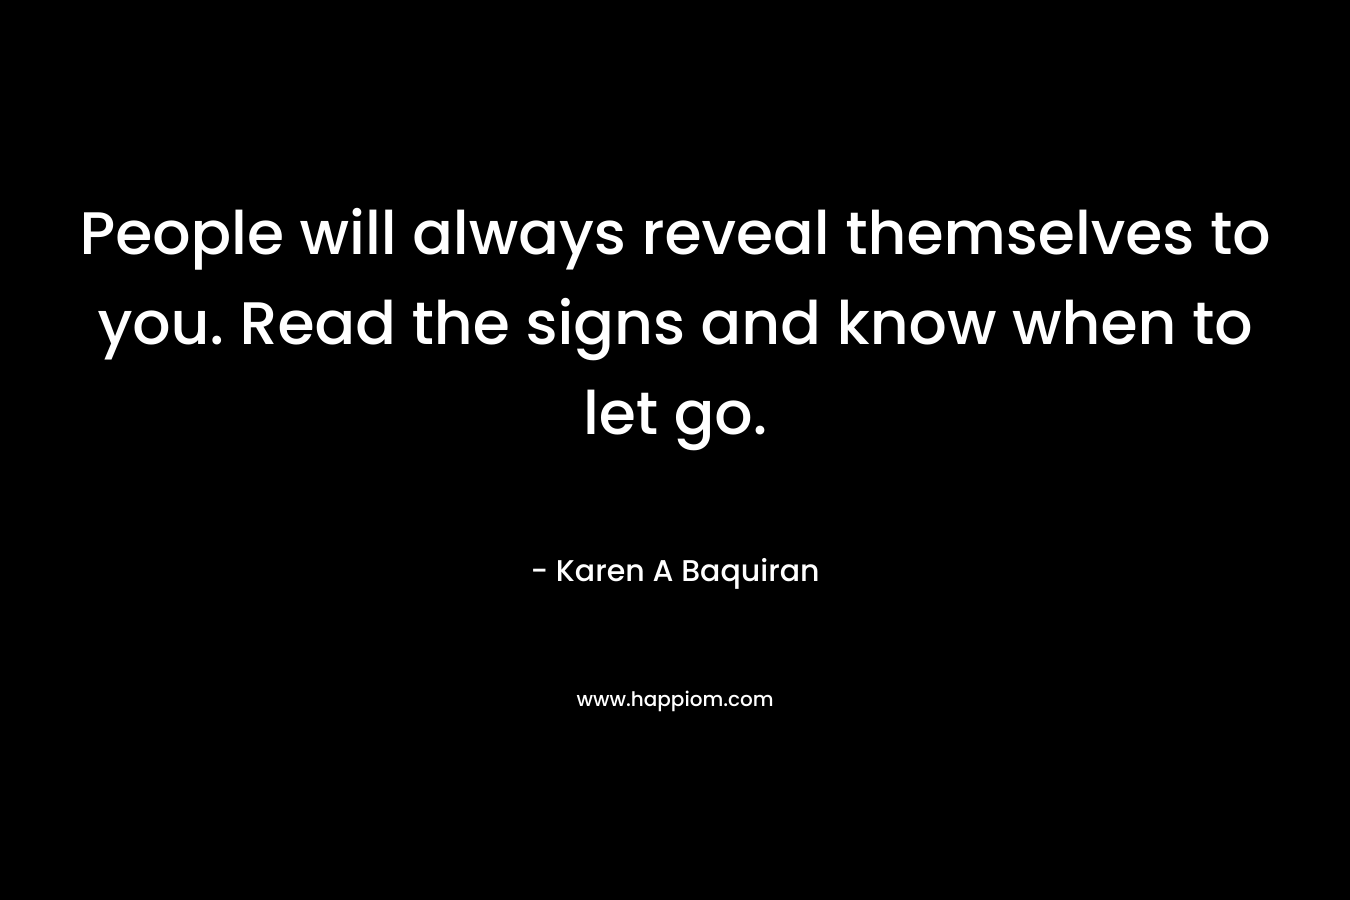 People will always reveal themselves to you. Read the signs and know when to let go. – Karen A Baquiran